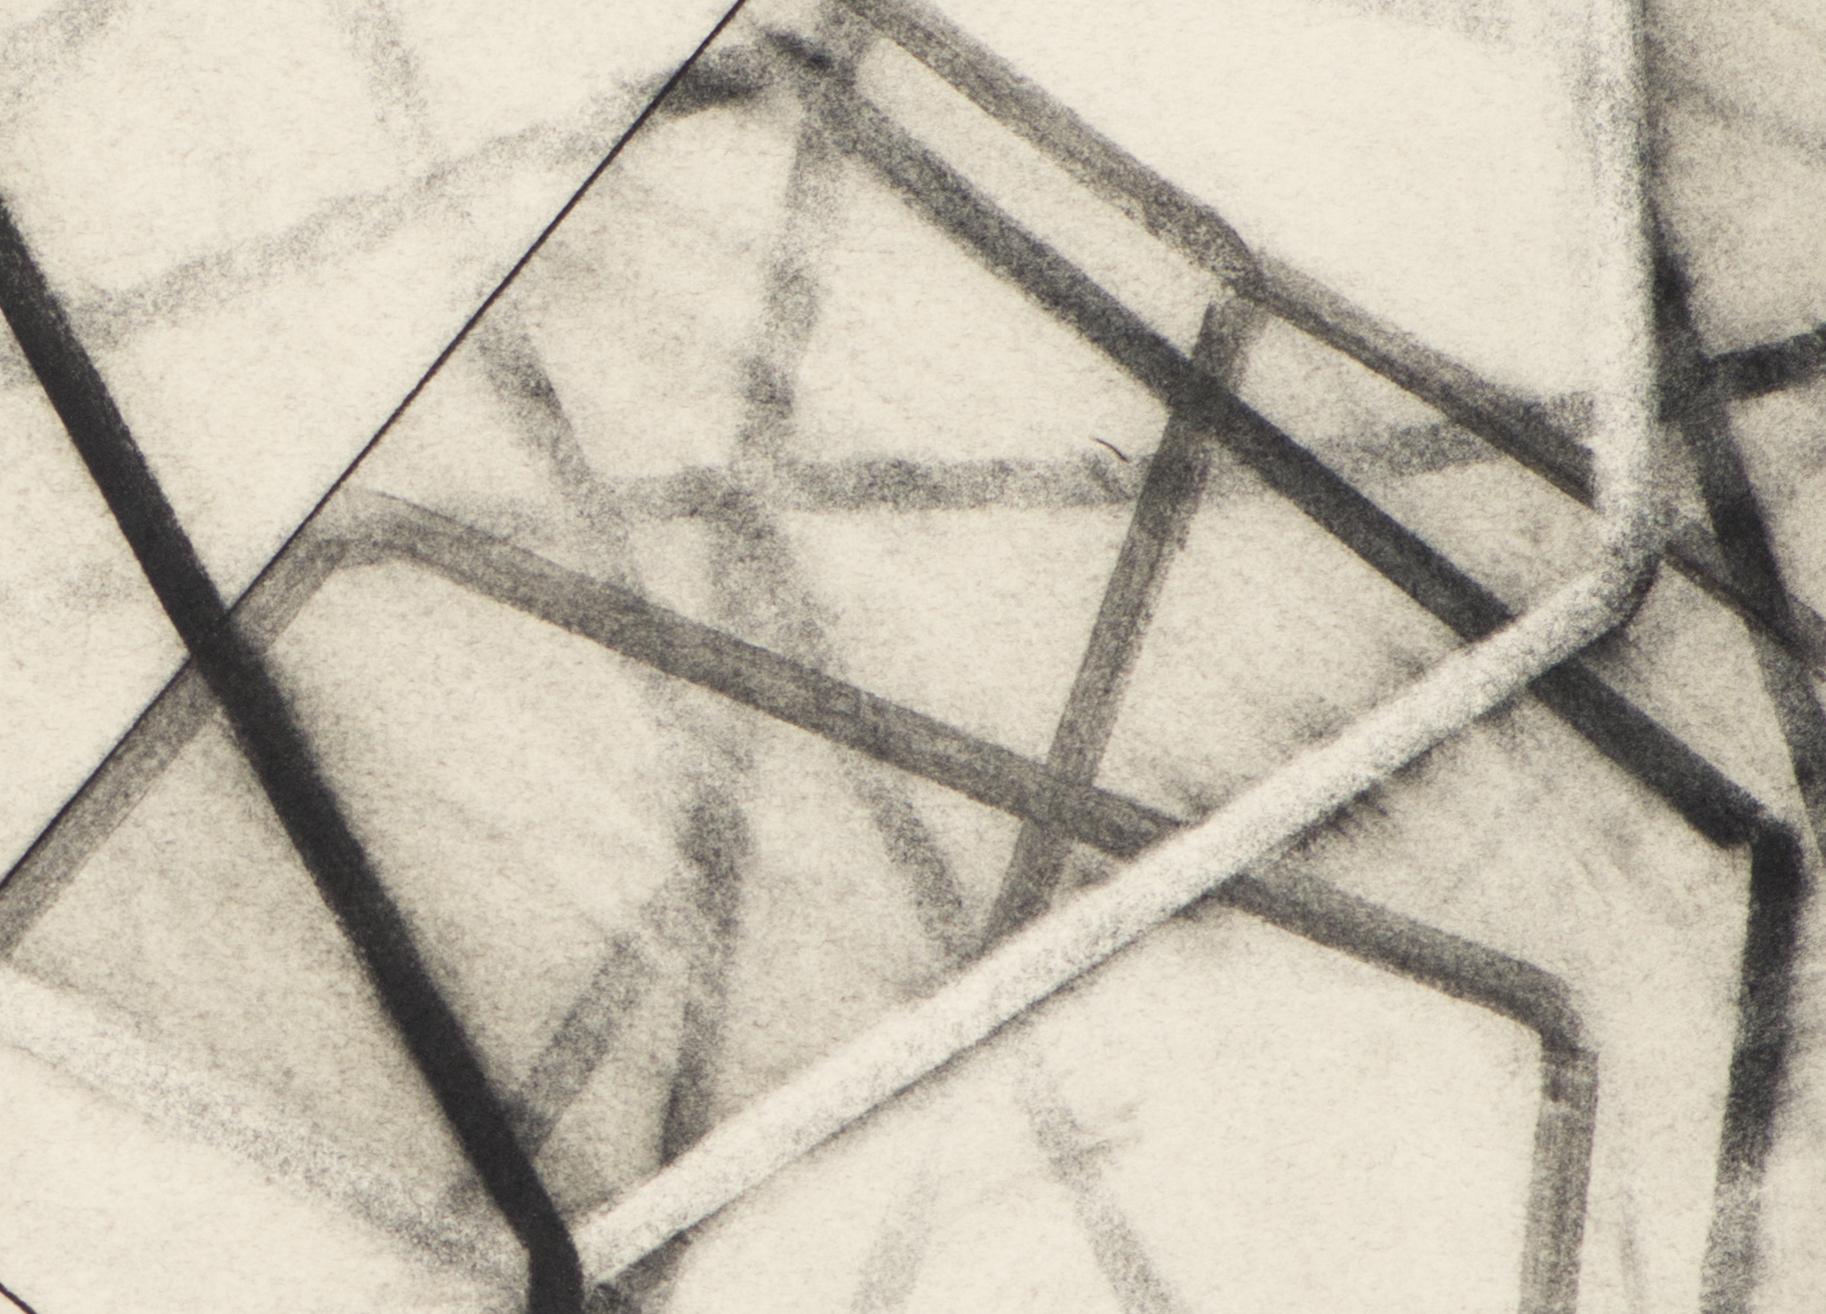 charcoal on paper

Mark Pomilio’s method, motives, and conceptual considerations are centered on visually articulating recent developments in the life sciences. It is not his intent to condemn or celebrate these developments, but rather, to express